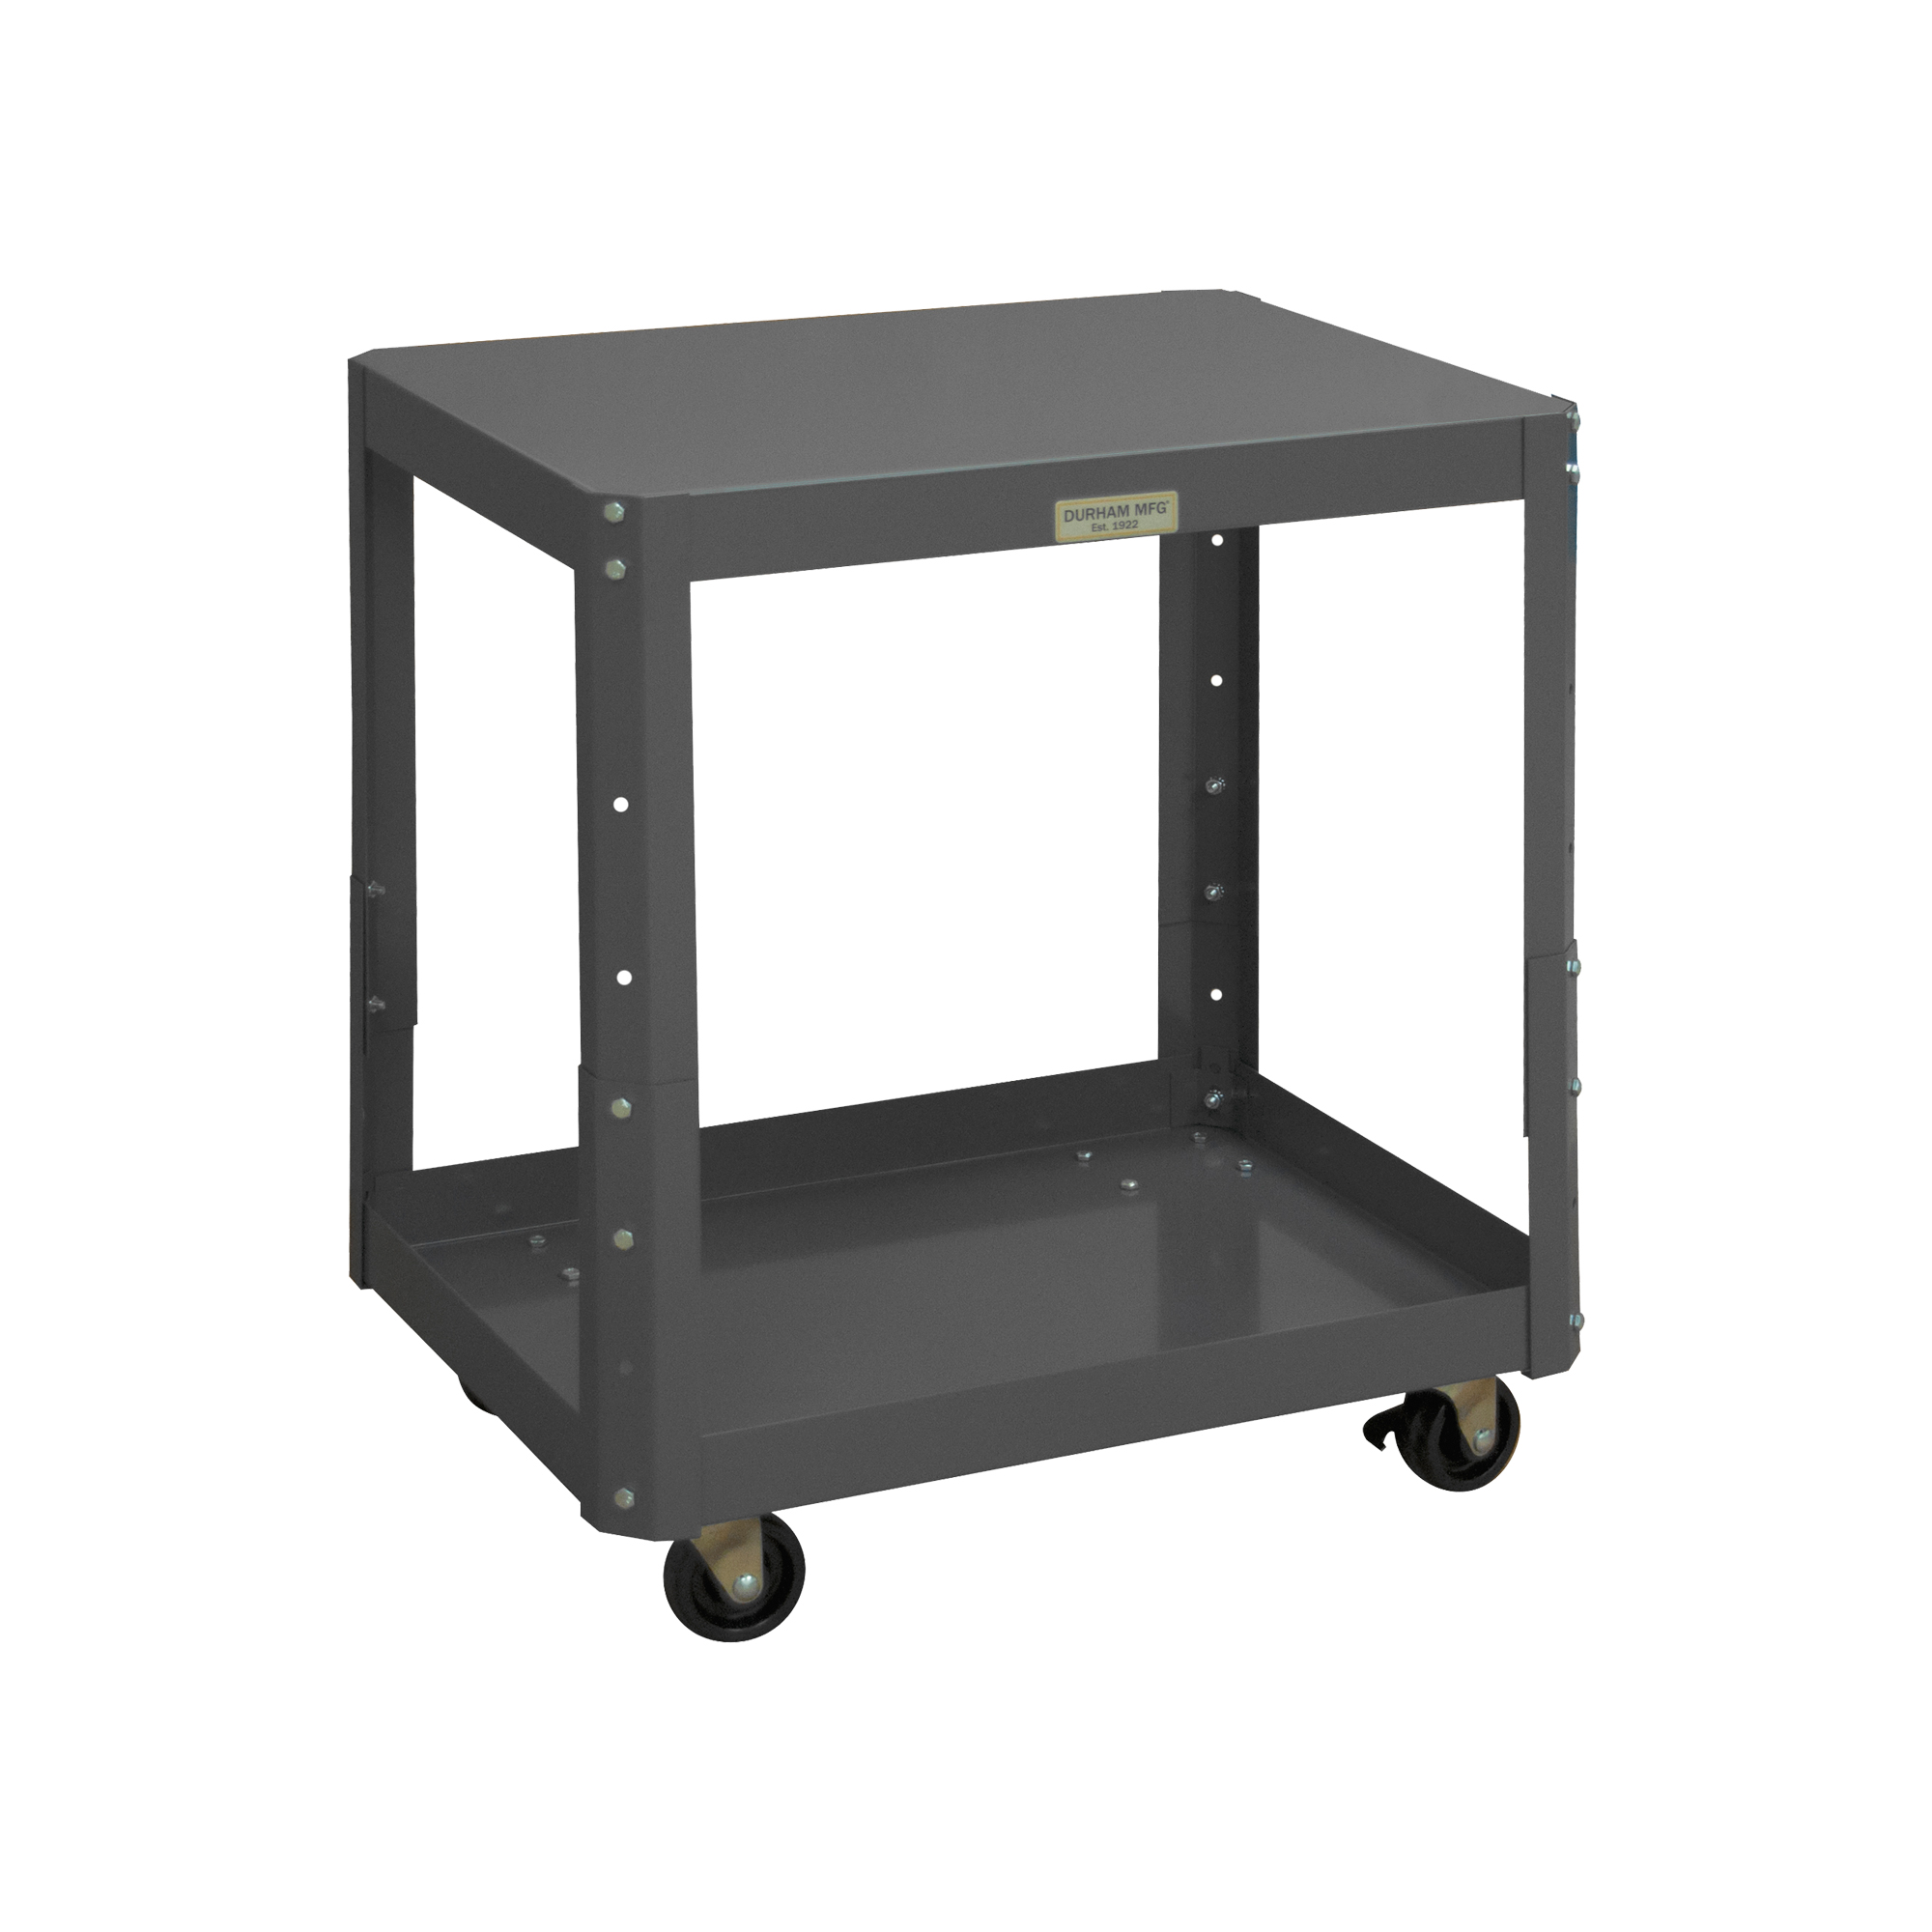 Mobile MT Workbench, Adjustable Height, Size 36 x 24 x 28 Inch